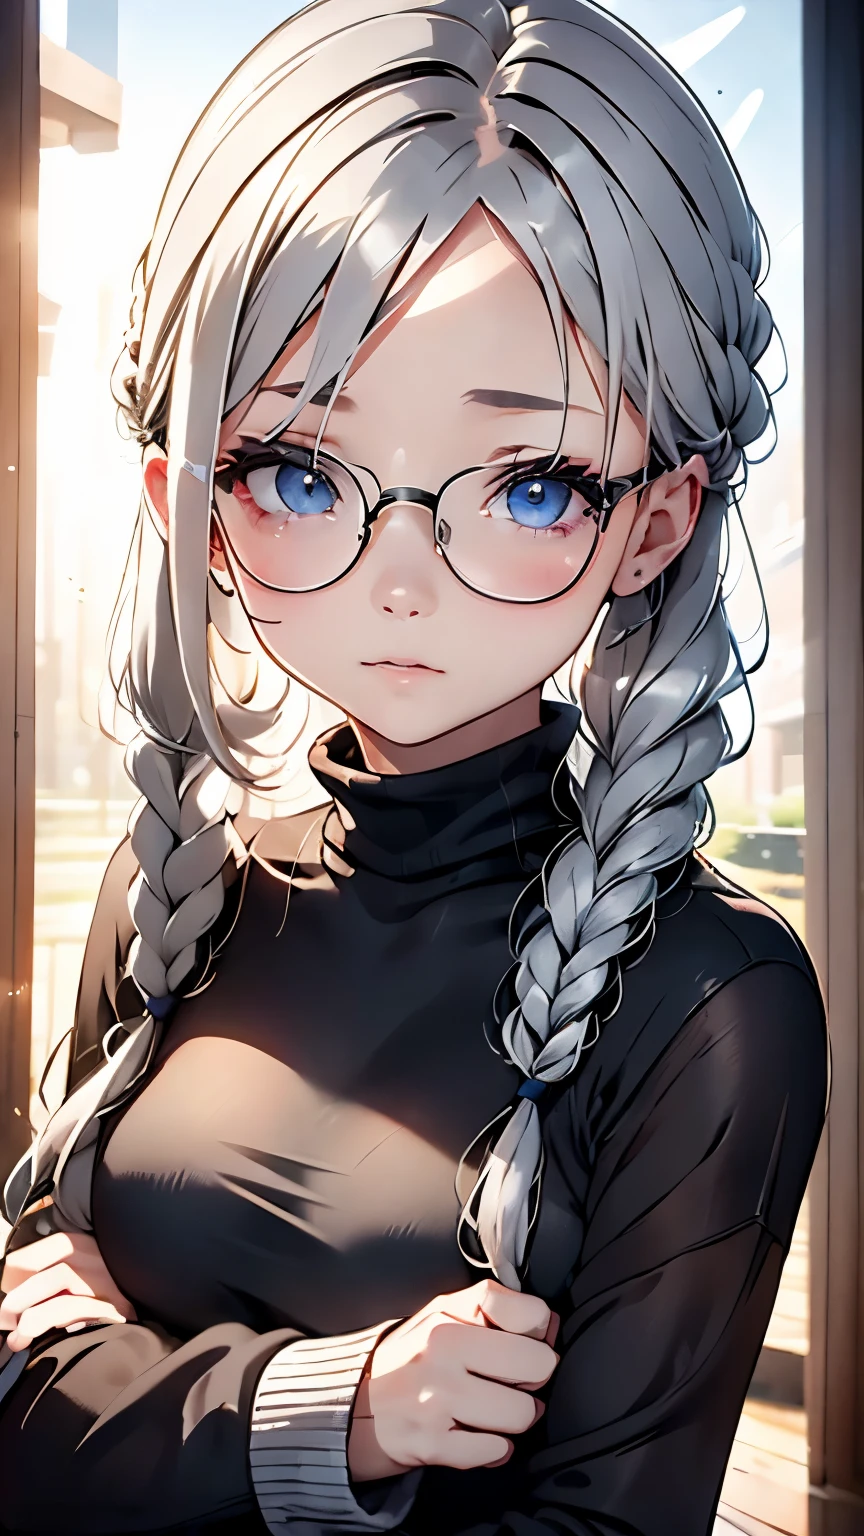 one woman、１4 talents、cozy turtleneck sweater、Upper body angle、Very cute、Perfect good looks、Braid、ash gray hair:1.5、glare of the sun、Depth of object being written、blurred background、particles of light、Strange wind、Highest image quality、highest quality、ultra high resolution、master piece